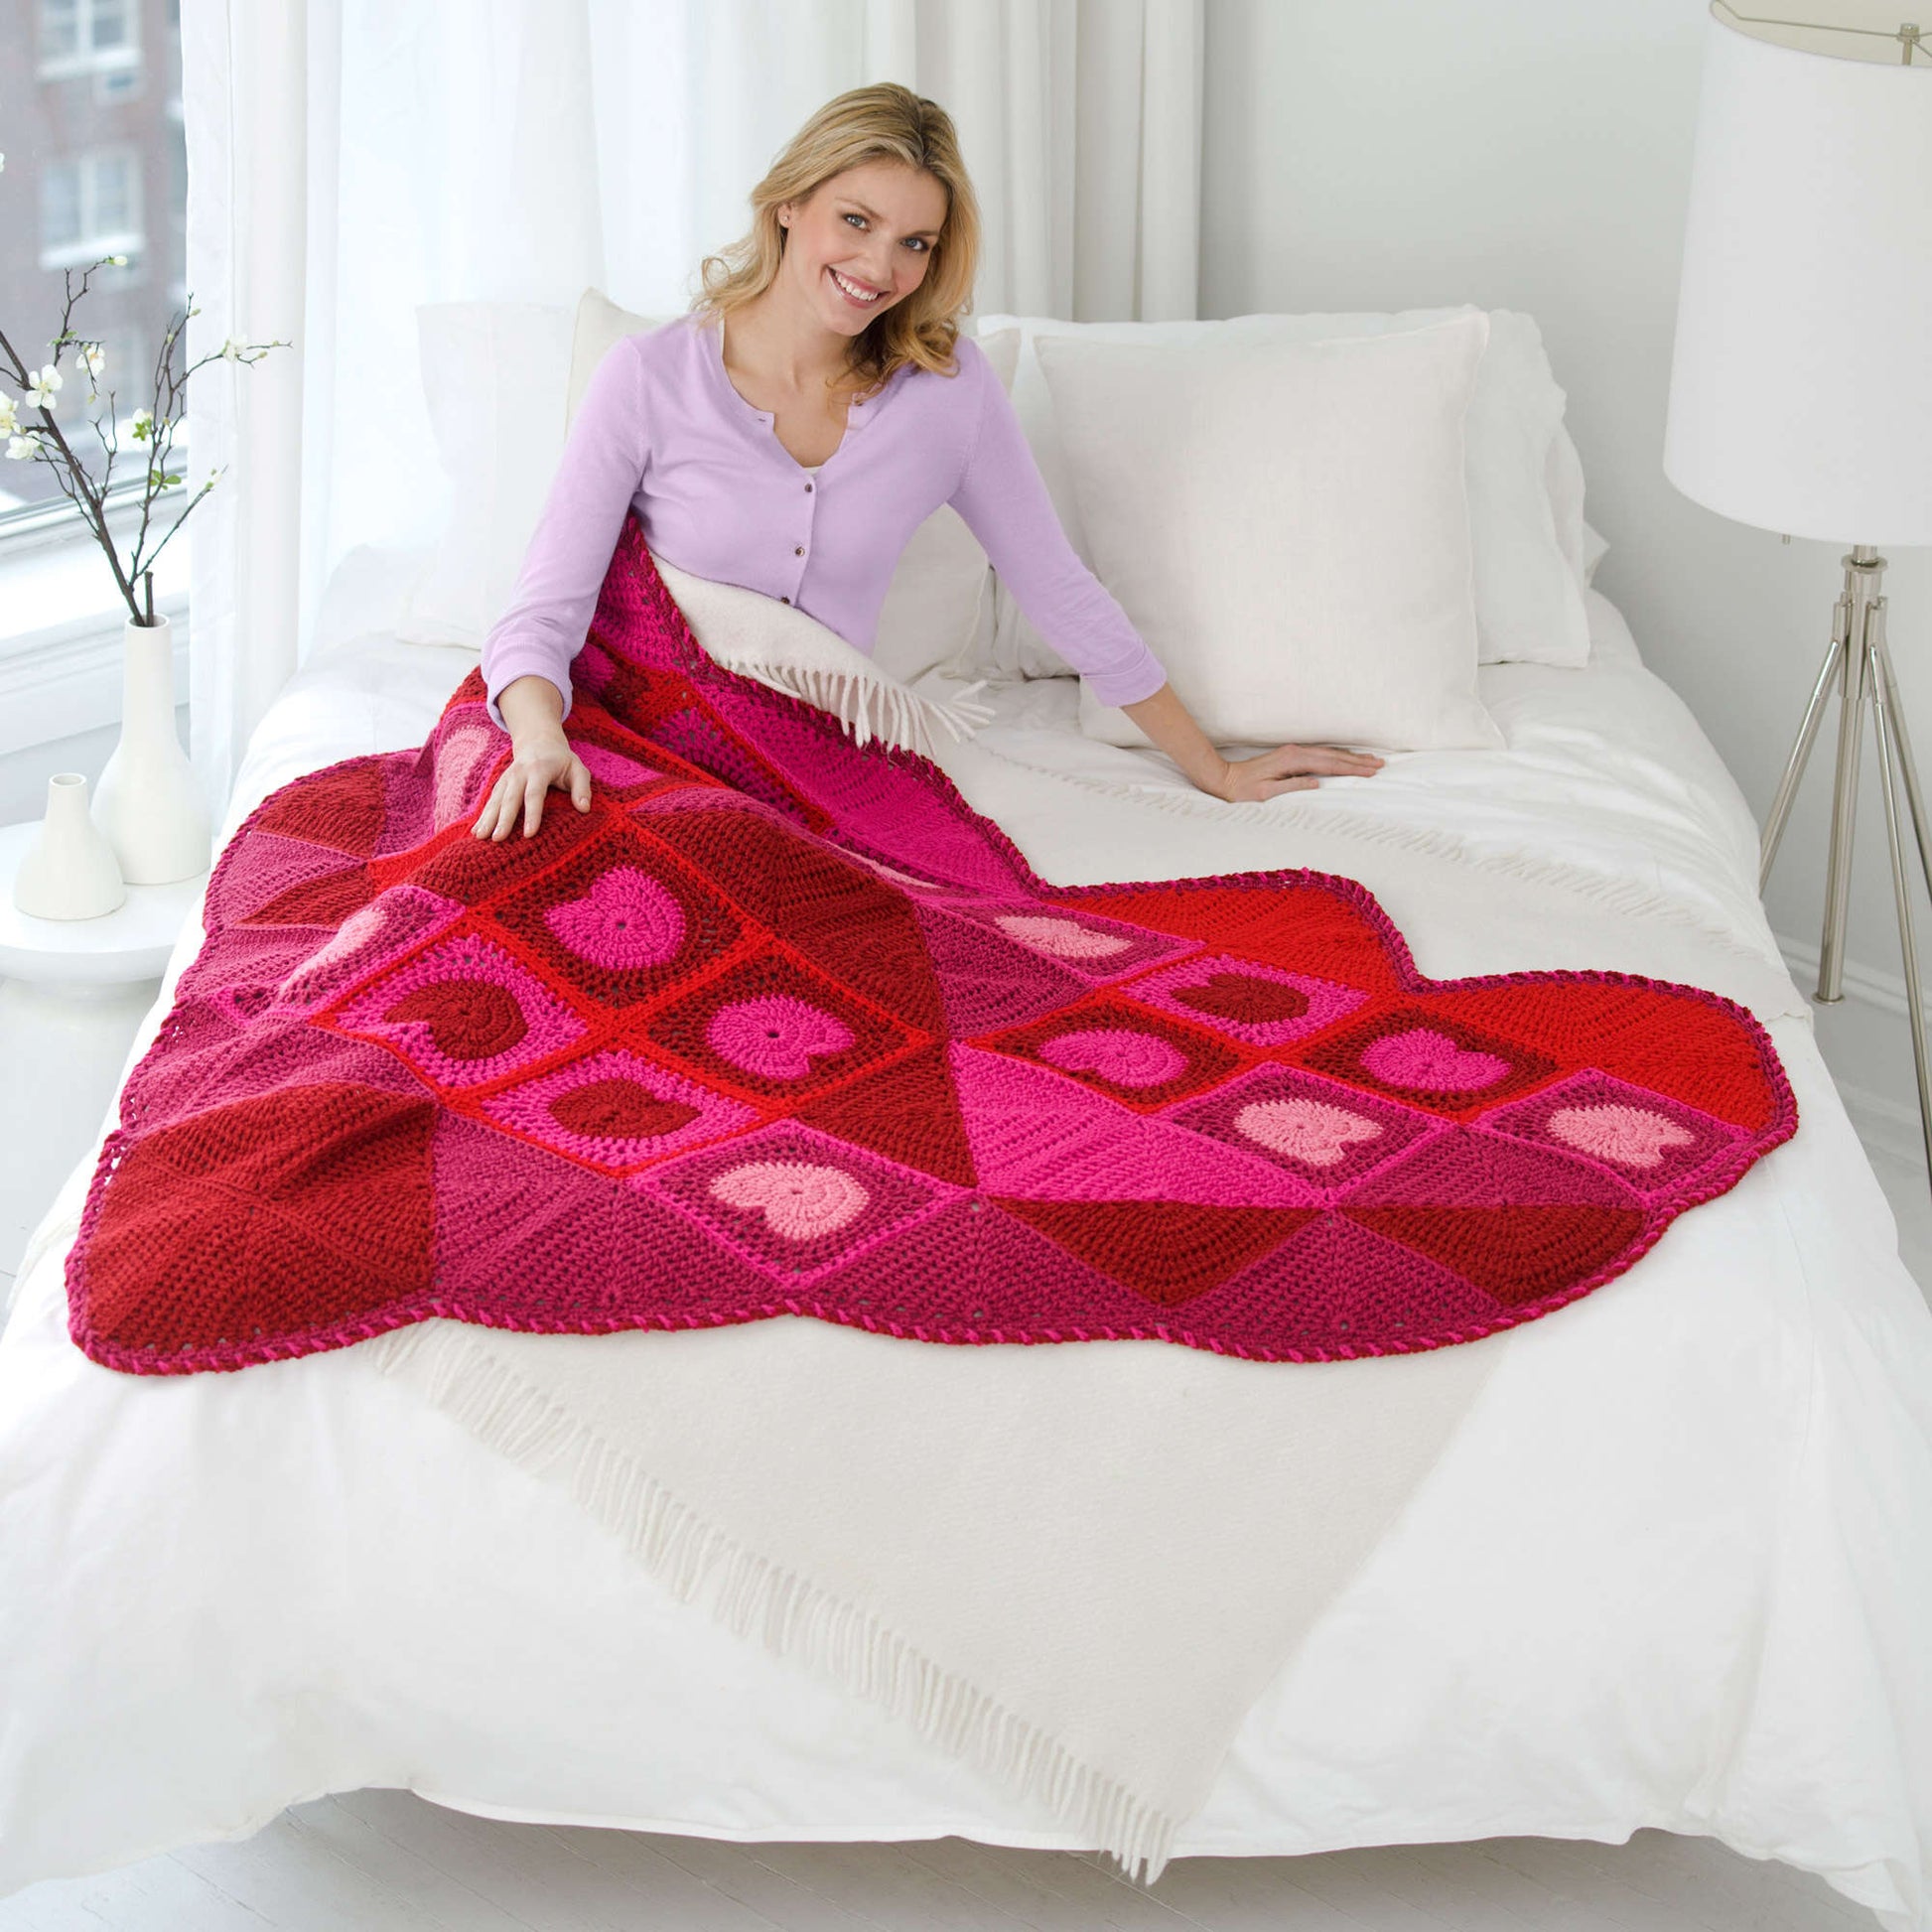 Free Red Heart Warm My Heart Throw Pattern